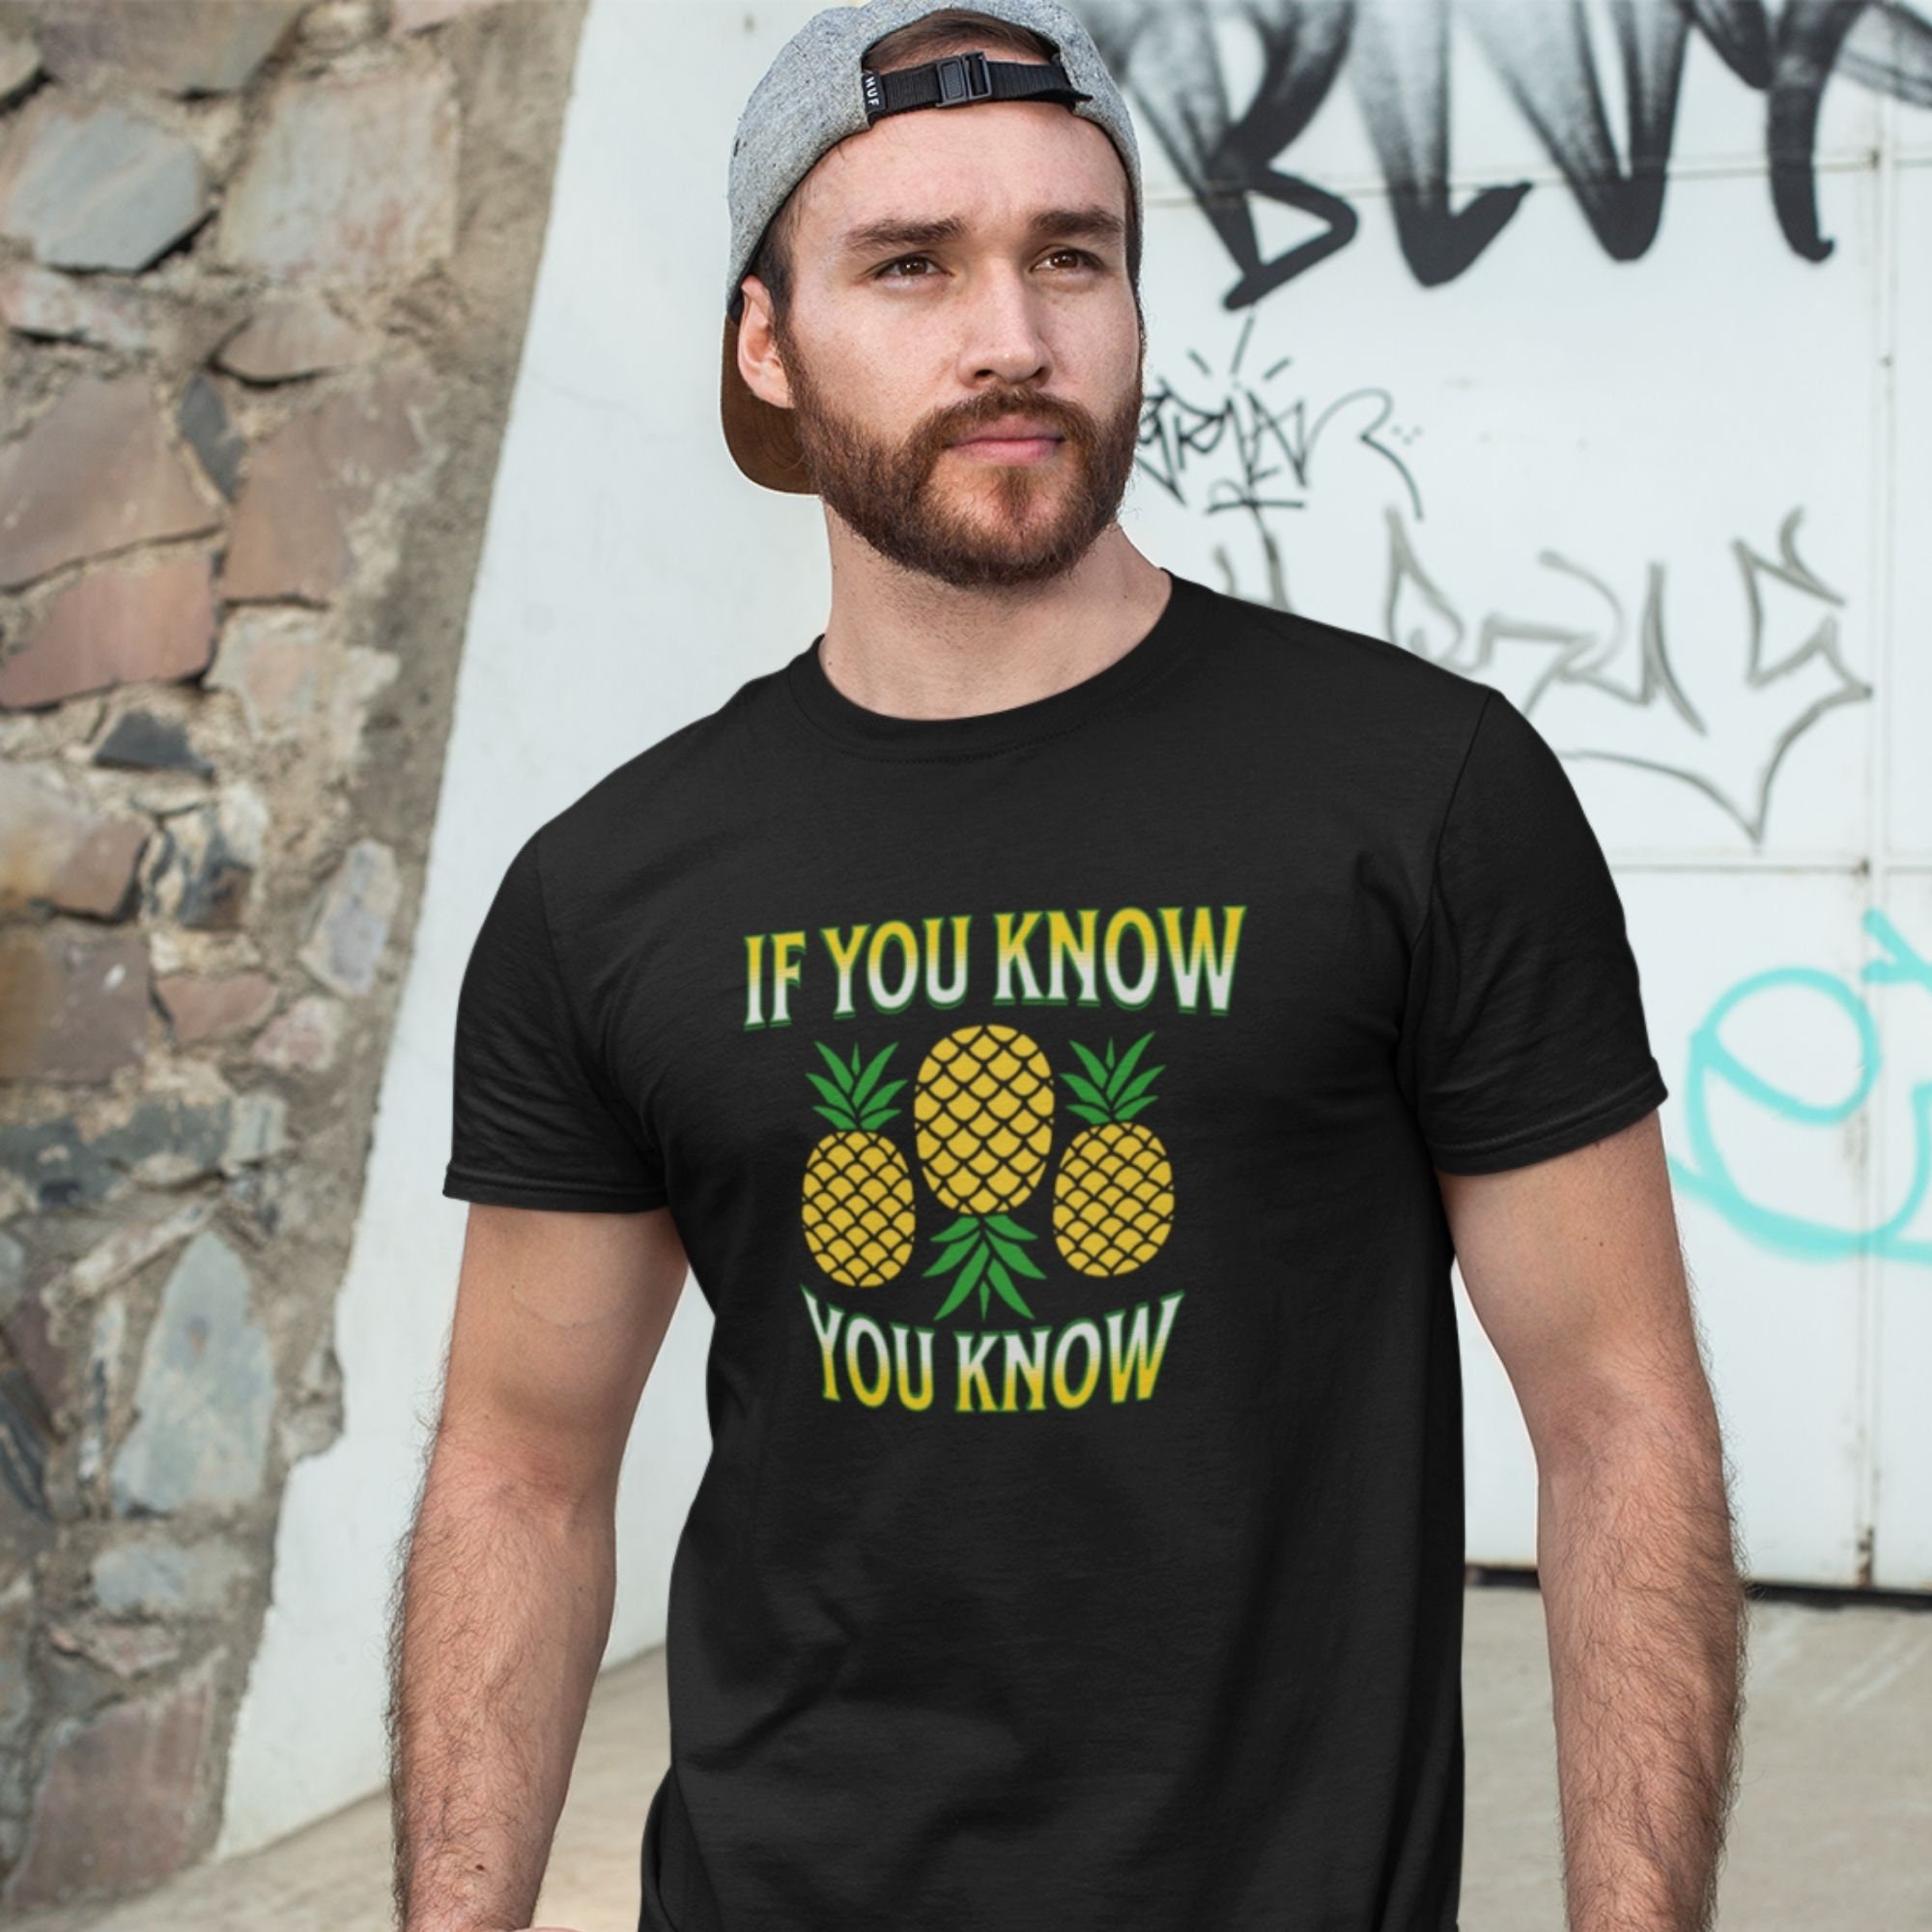 Swingers Pineapple Shirt If You Know You Know Pineapple picture